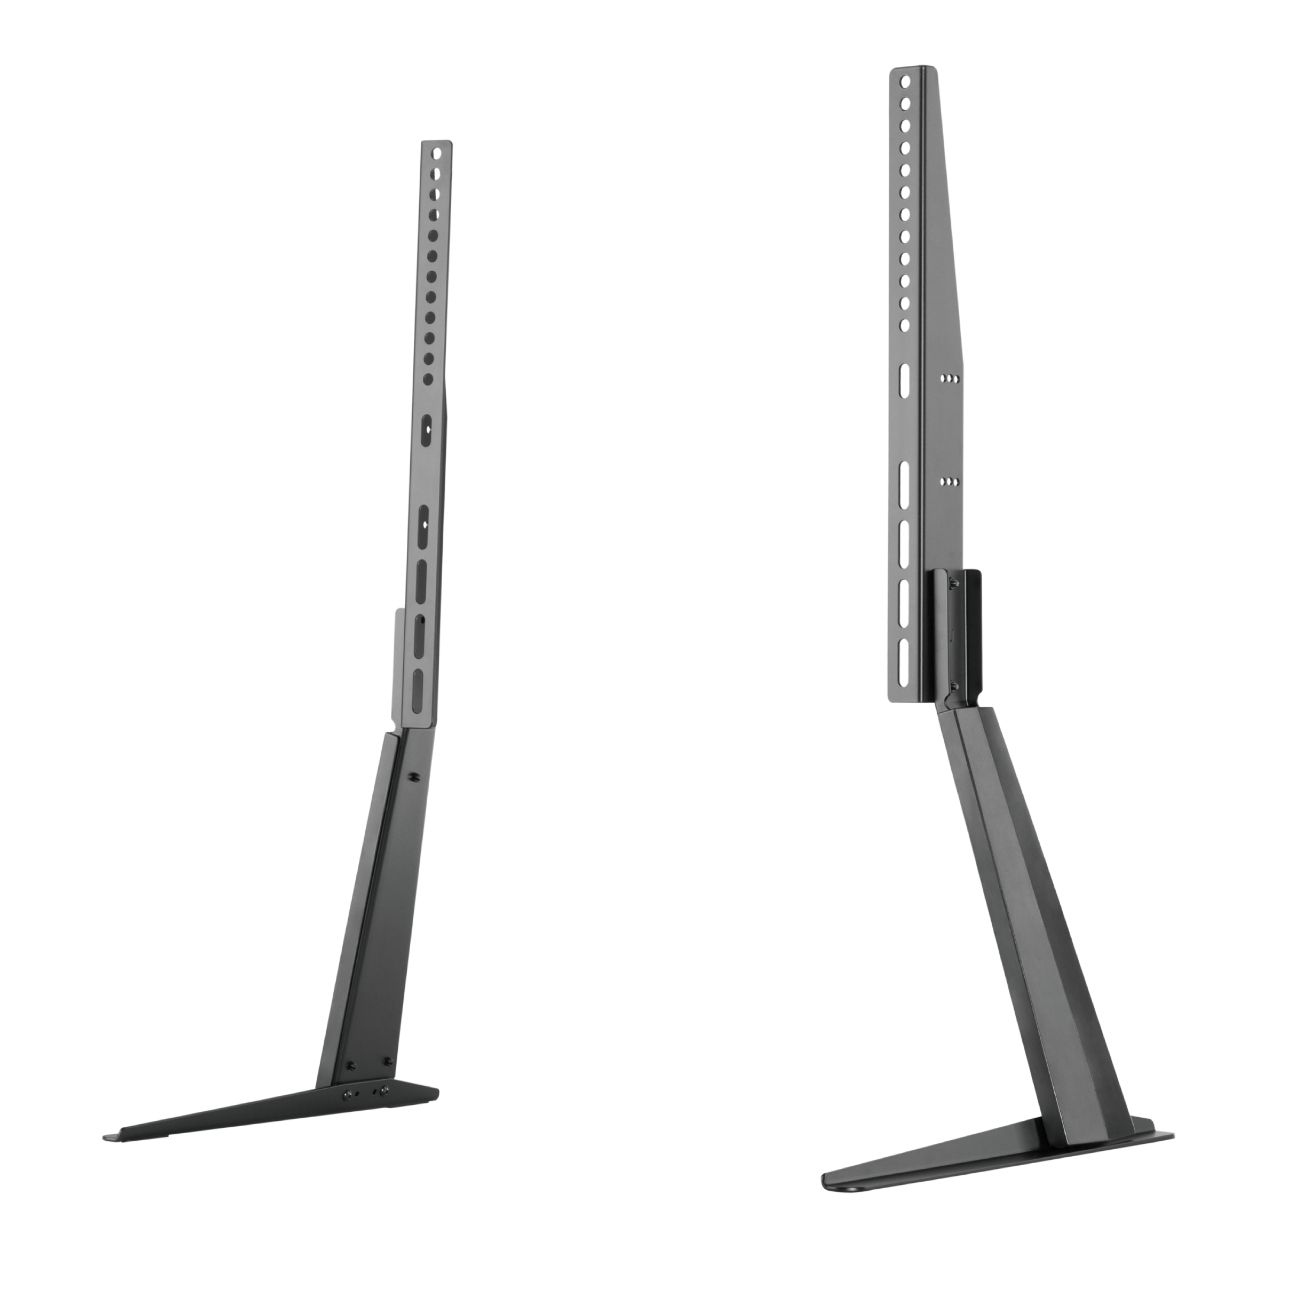 Pro 3270 – Universal Table Stand For Led Display 32" To 70" (jl41880 –  Jl41880) – Gbc Elettronica Throughout Universal Tabletop Tv Stands (View 12 of 20)